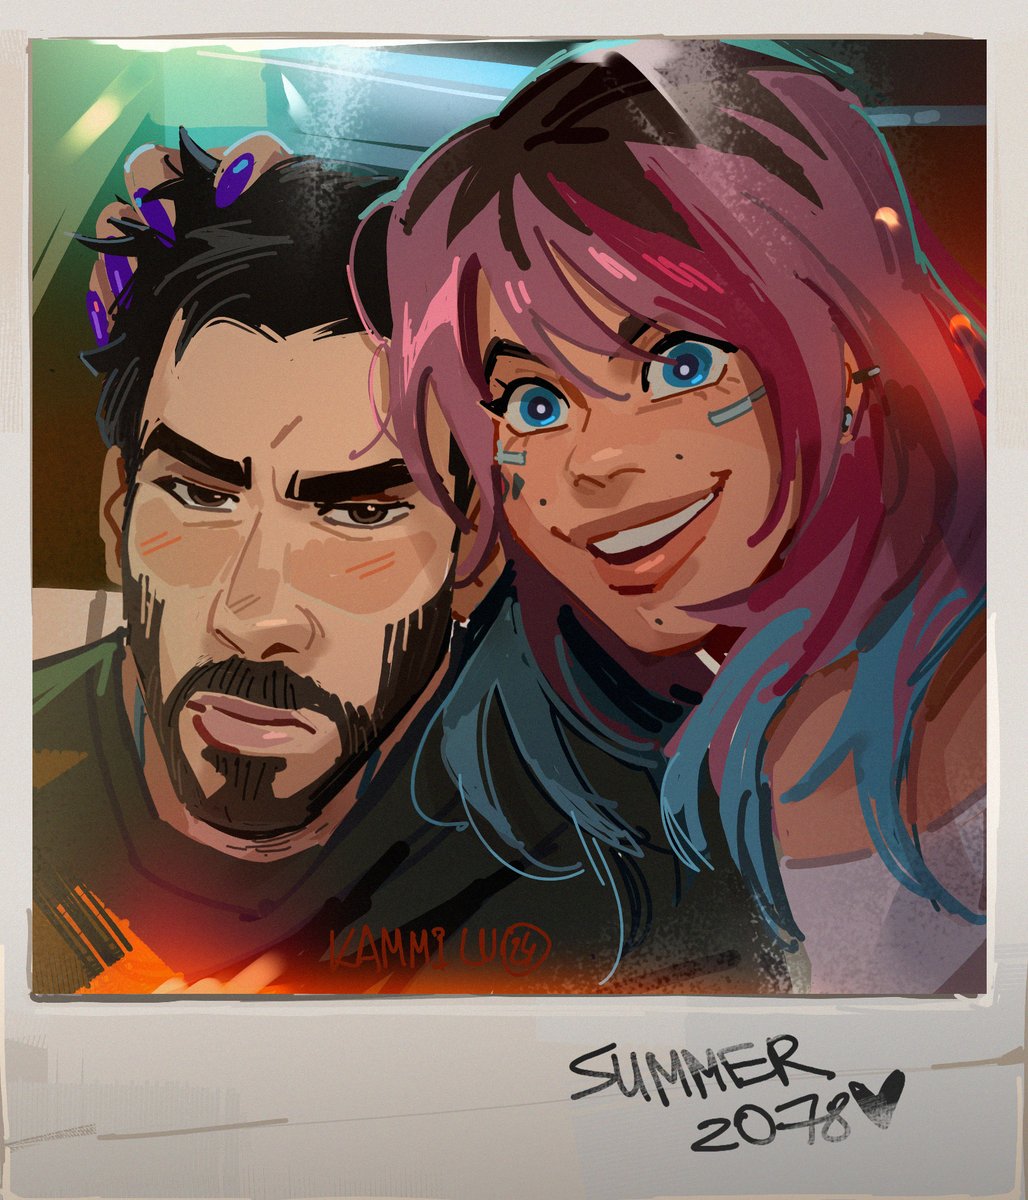 #cyberpunk2077 the story of how V found an old polaroid and Johnny got his hair cut... p.s. Johnny is already a living idiot of flesh and blood